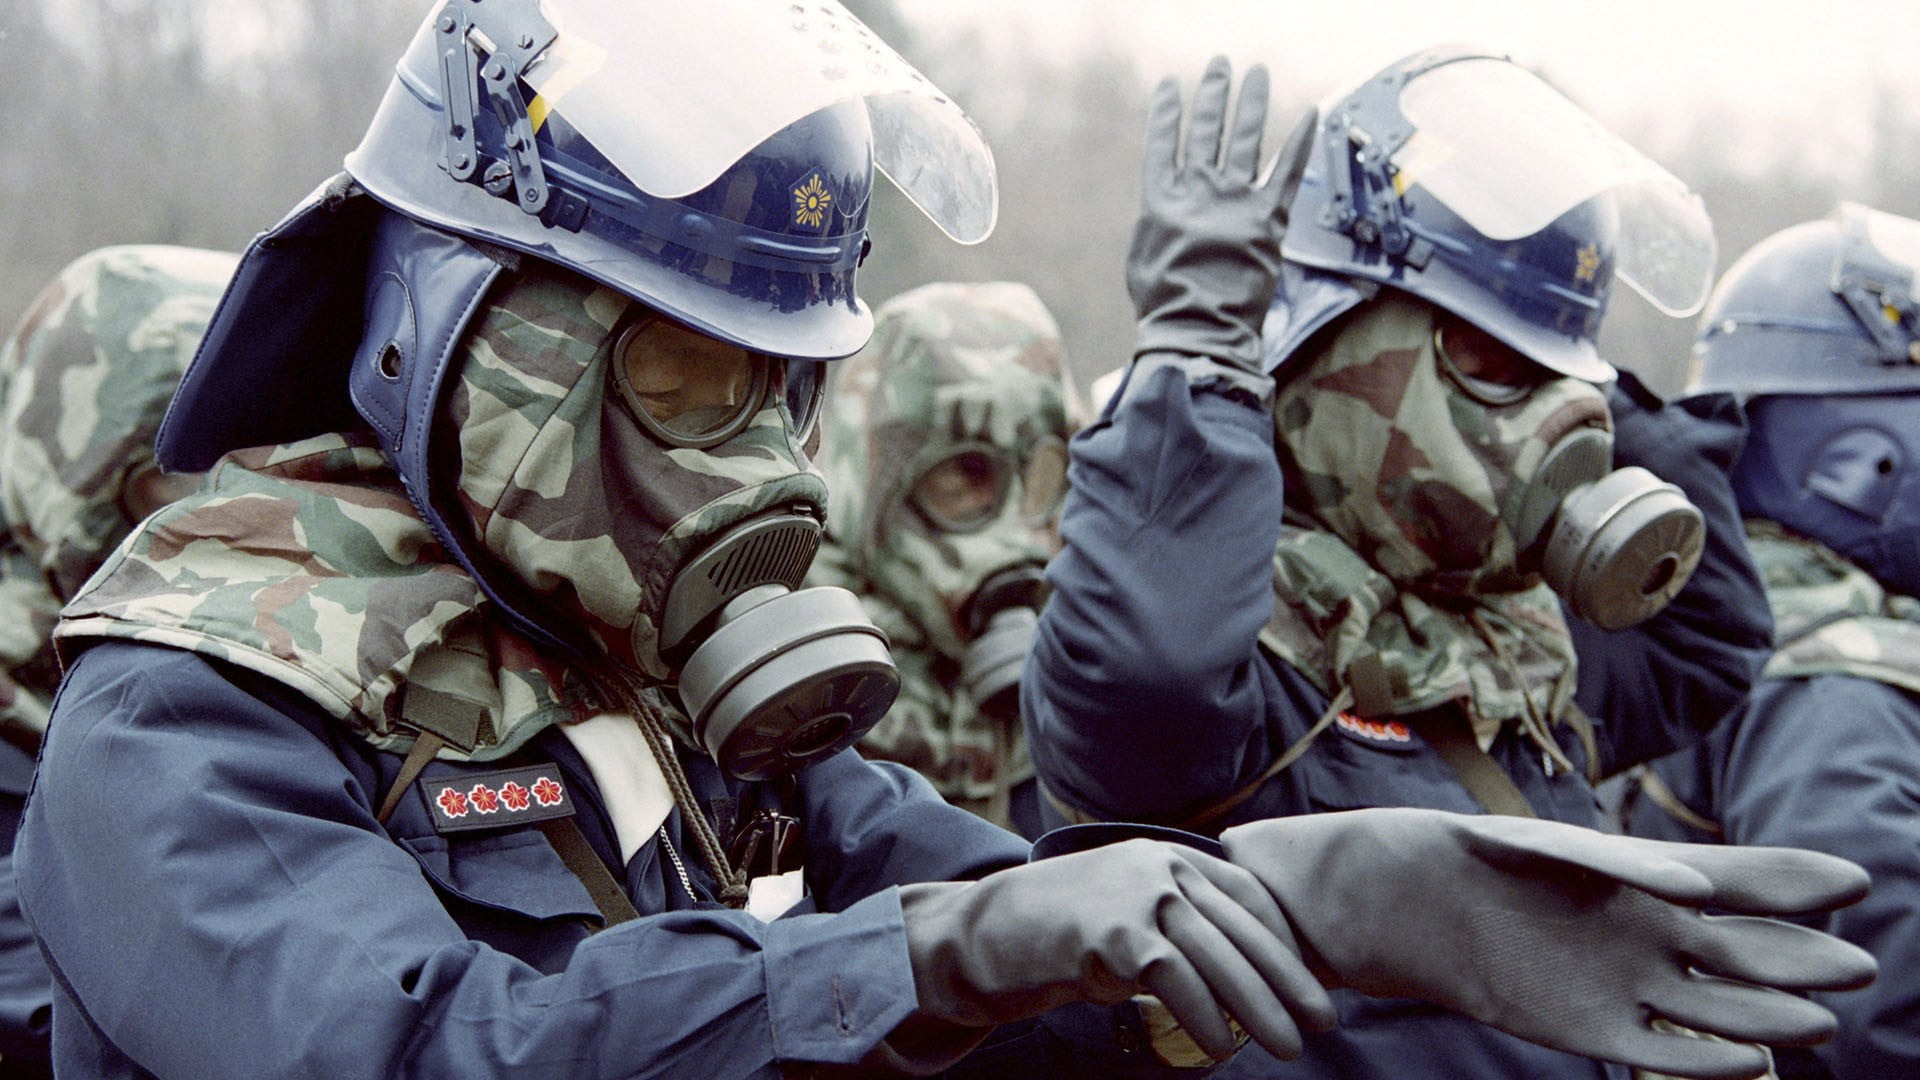 gas masks, military, group of people, government, armed forces